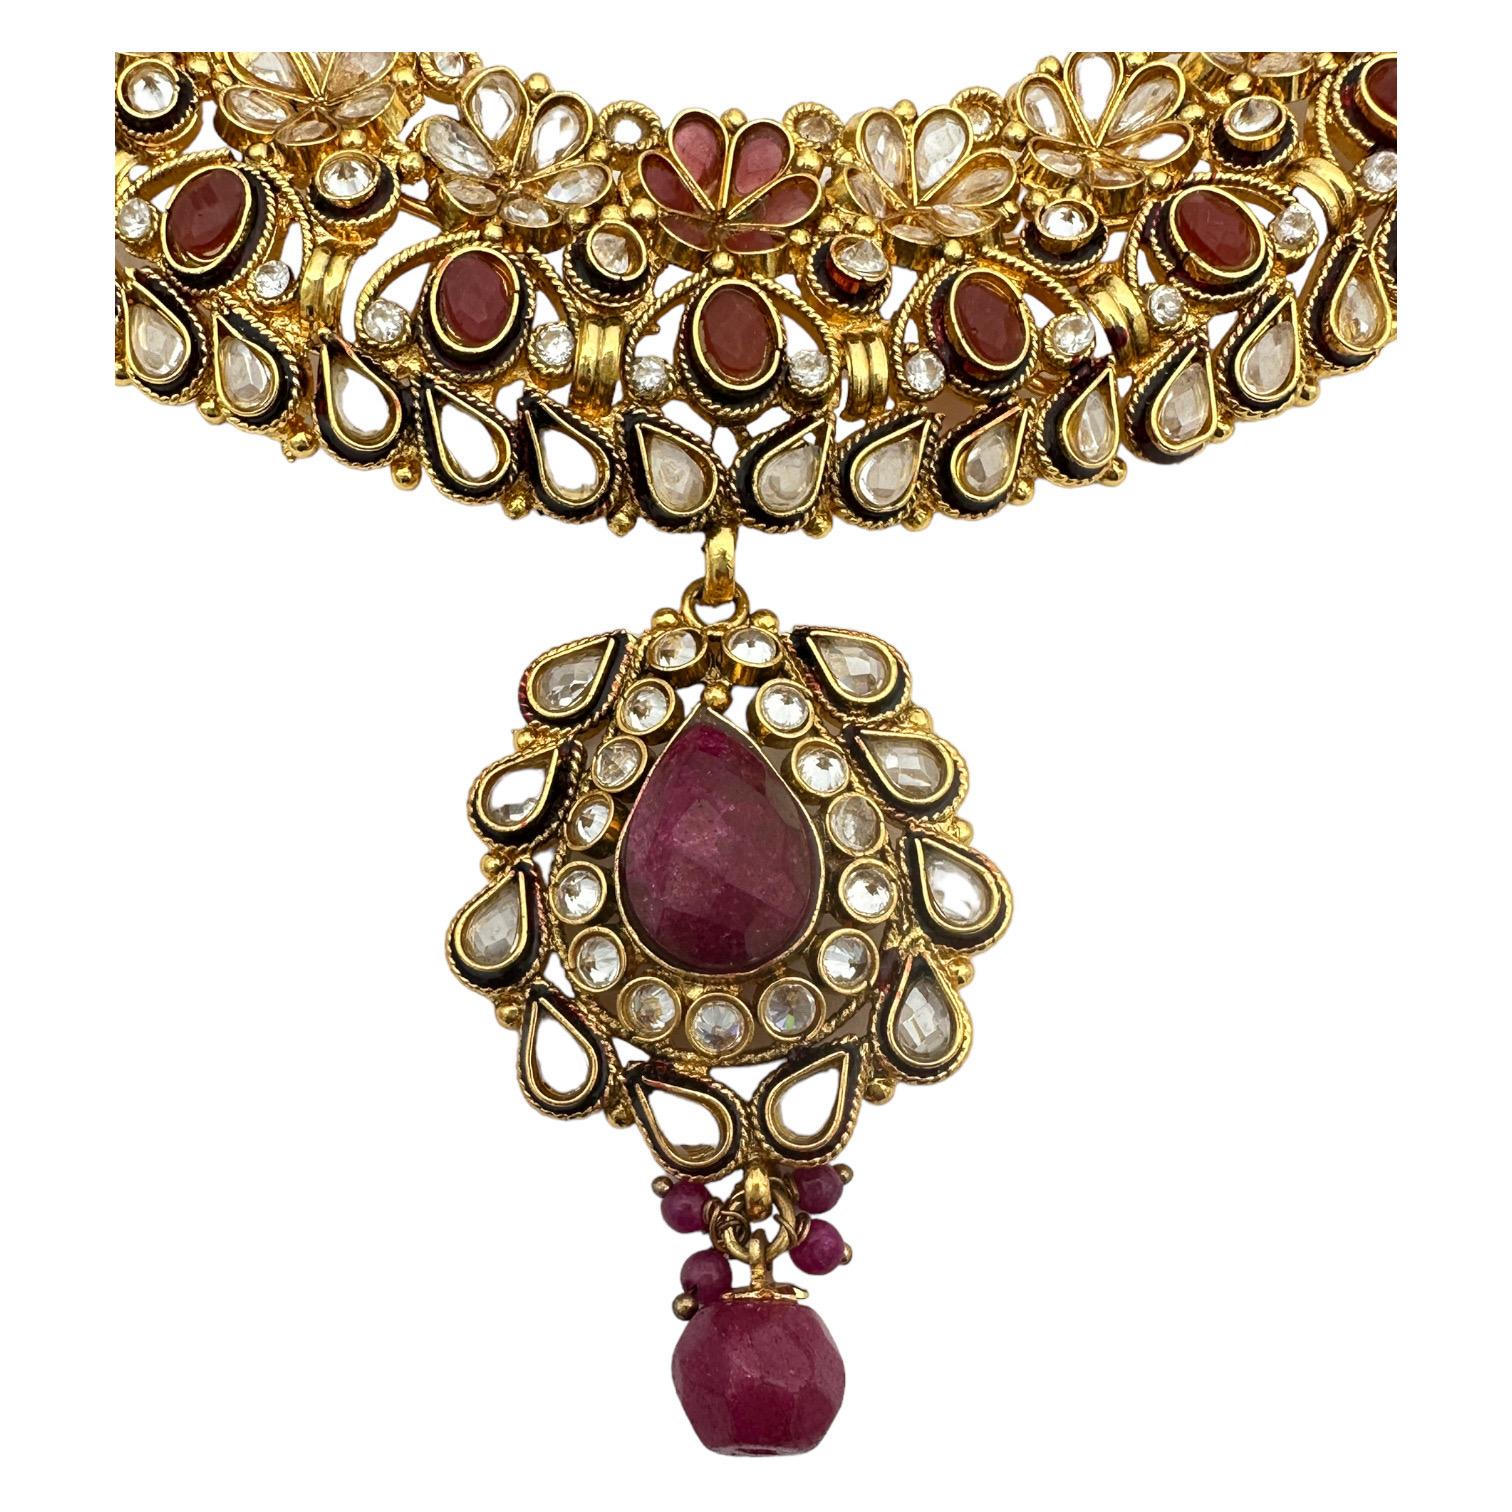 Add a touch of luxuriousness to your look with the Egyptian necklace. This ornate choker features an exquisite handmade design, delicately crafted using color to create a truly unique piece. Wear it day or night for a glamorous finish every time.